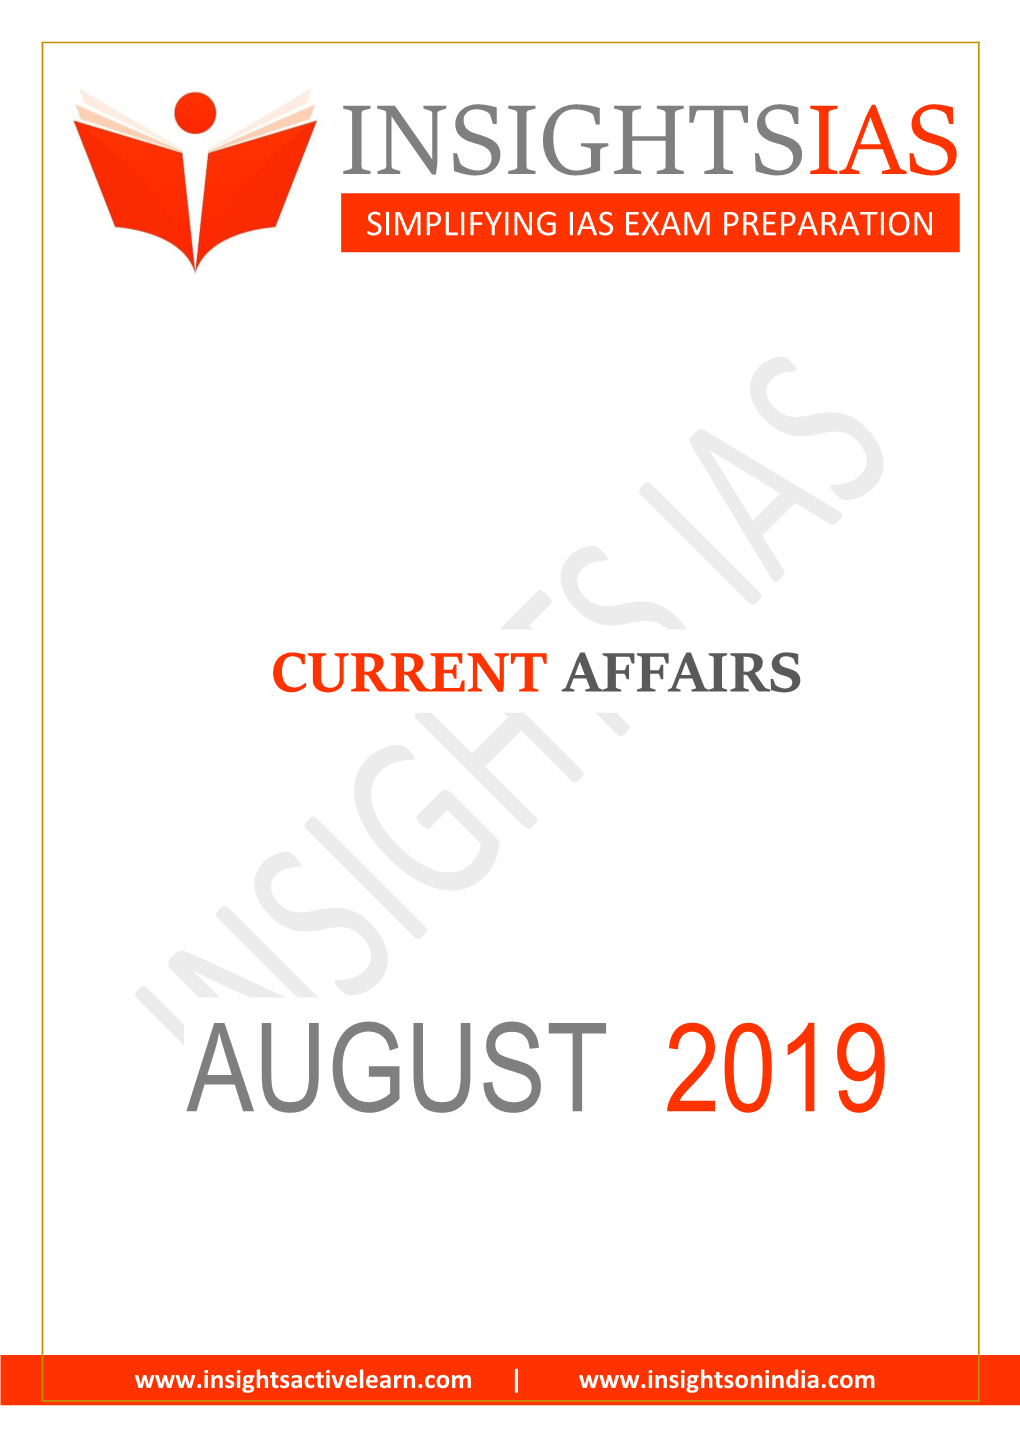 Insights August 2019 Current Affairs